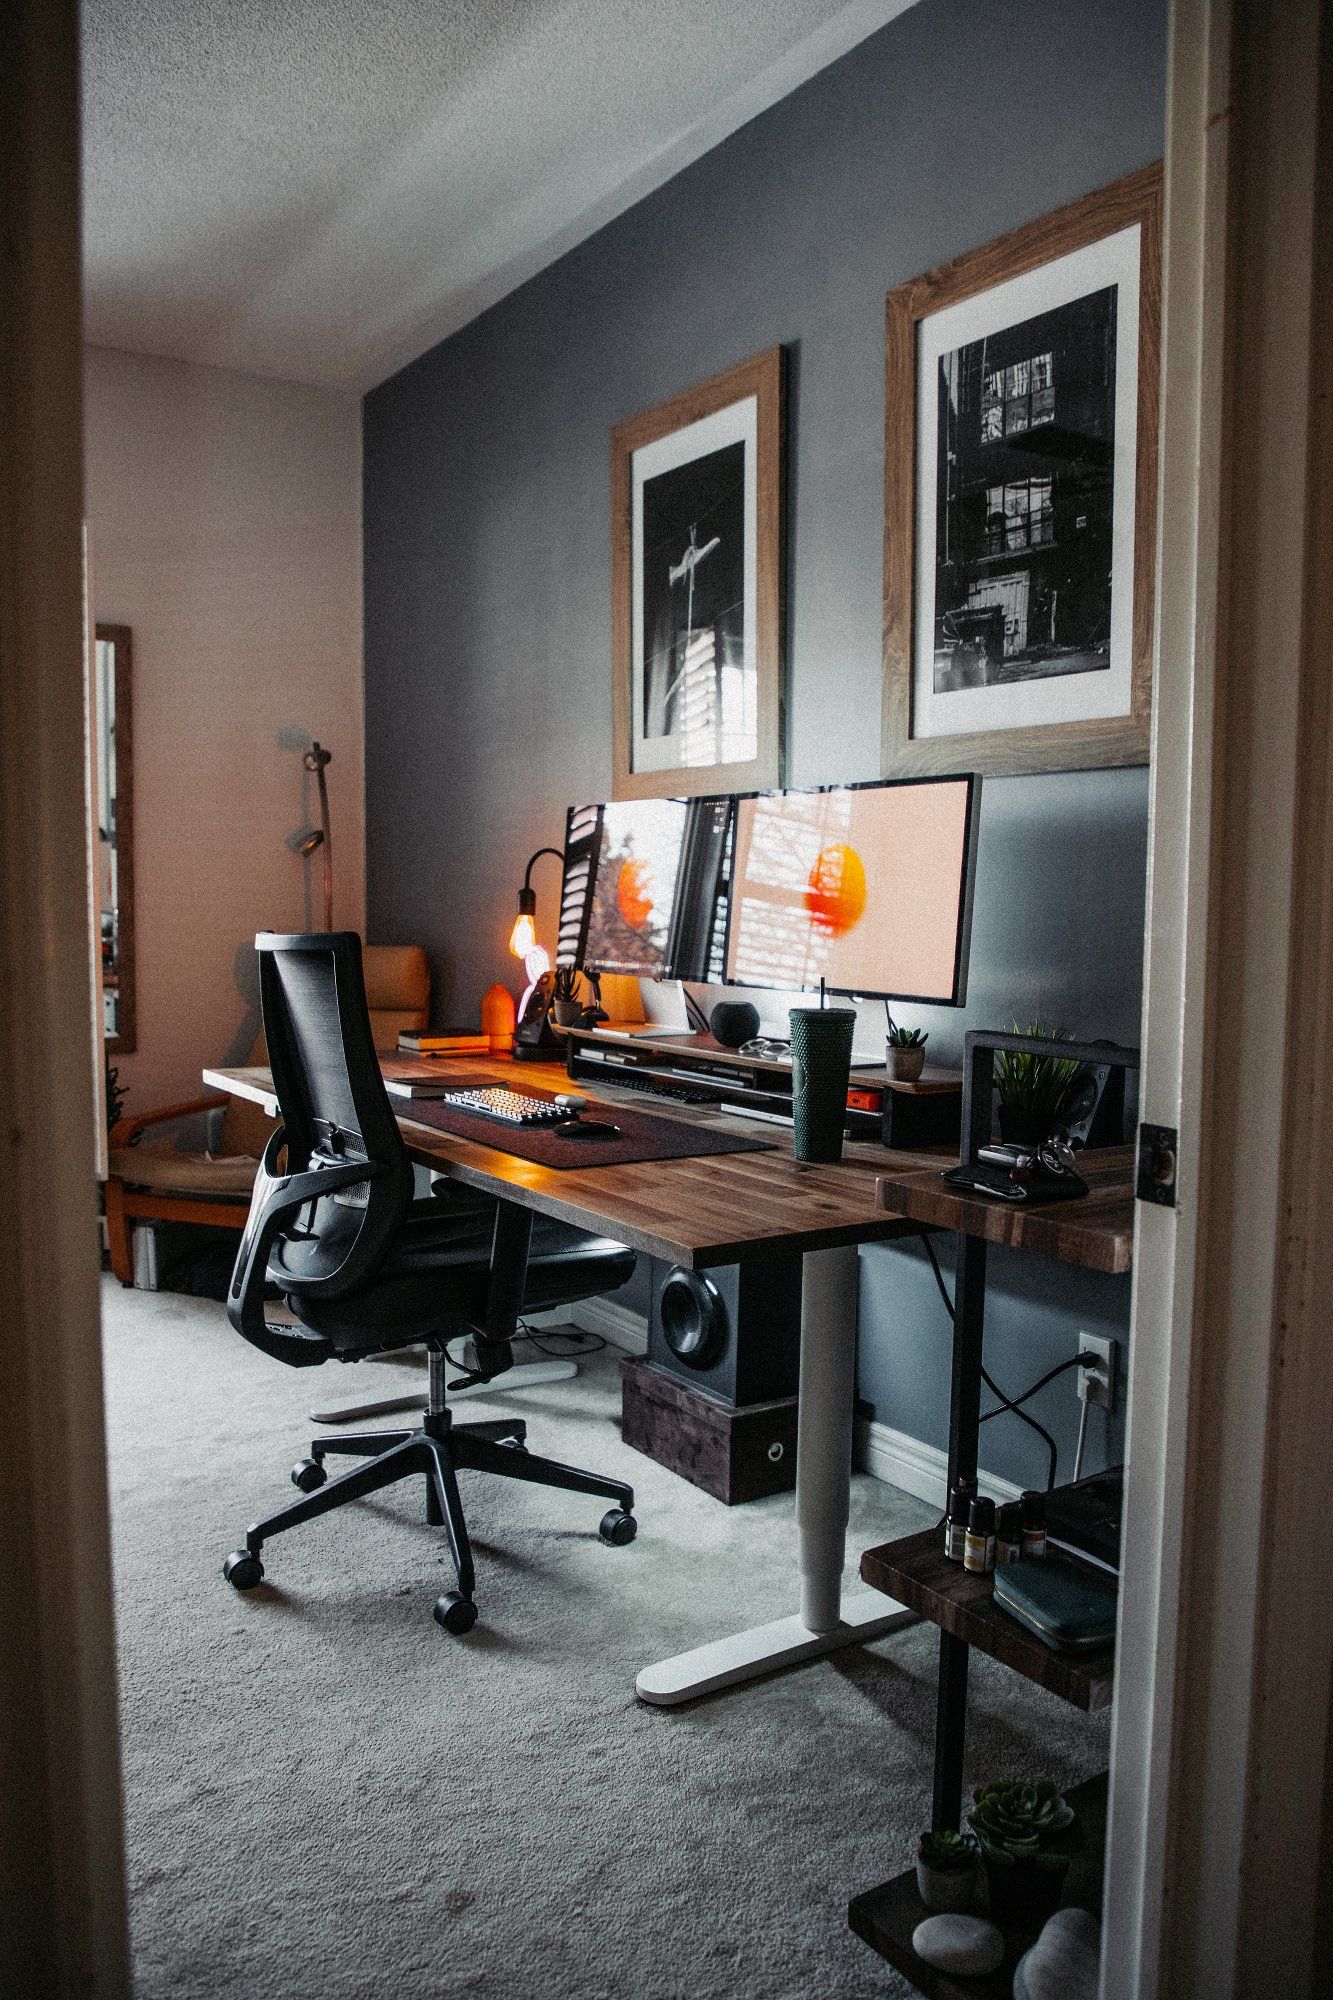 A view from the entry door of a creative standing desk workspace with two monitors